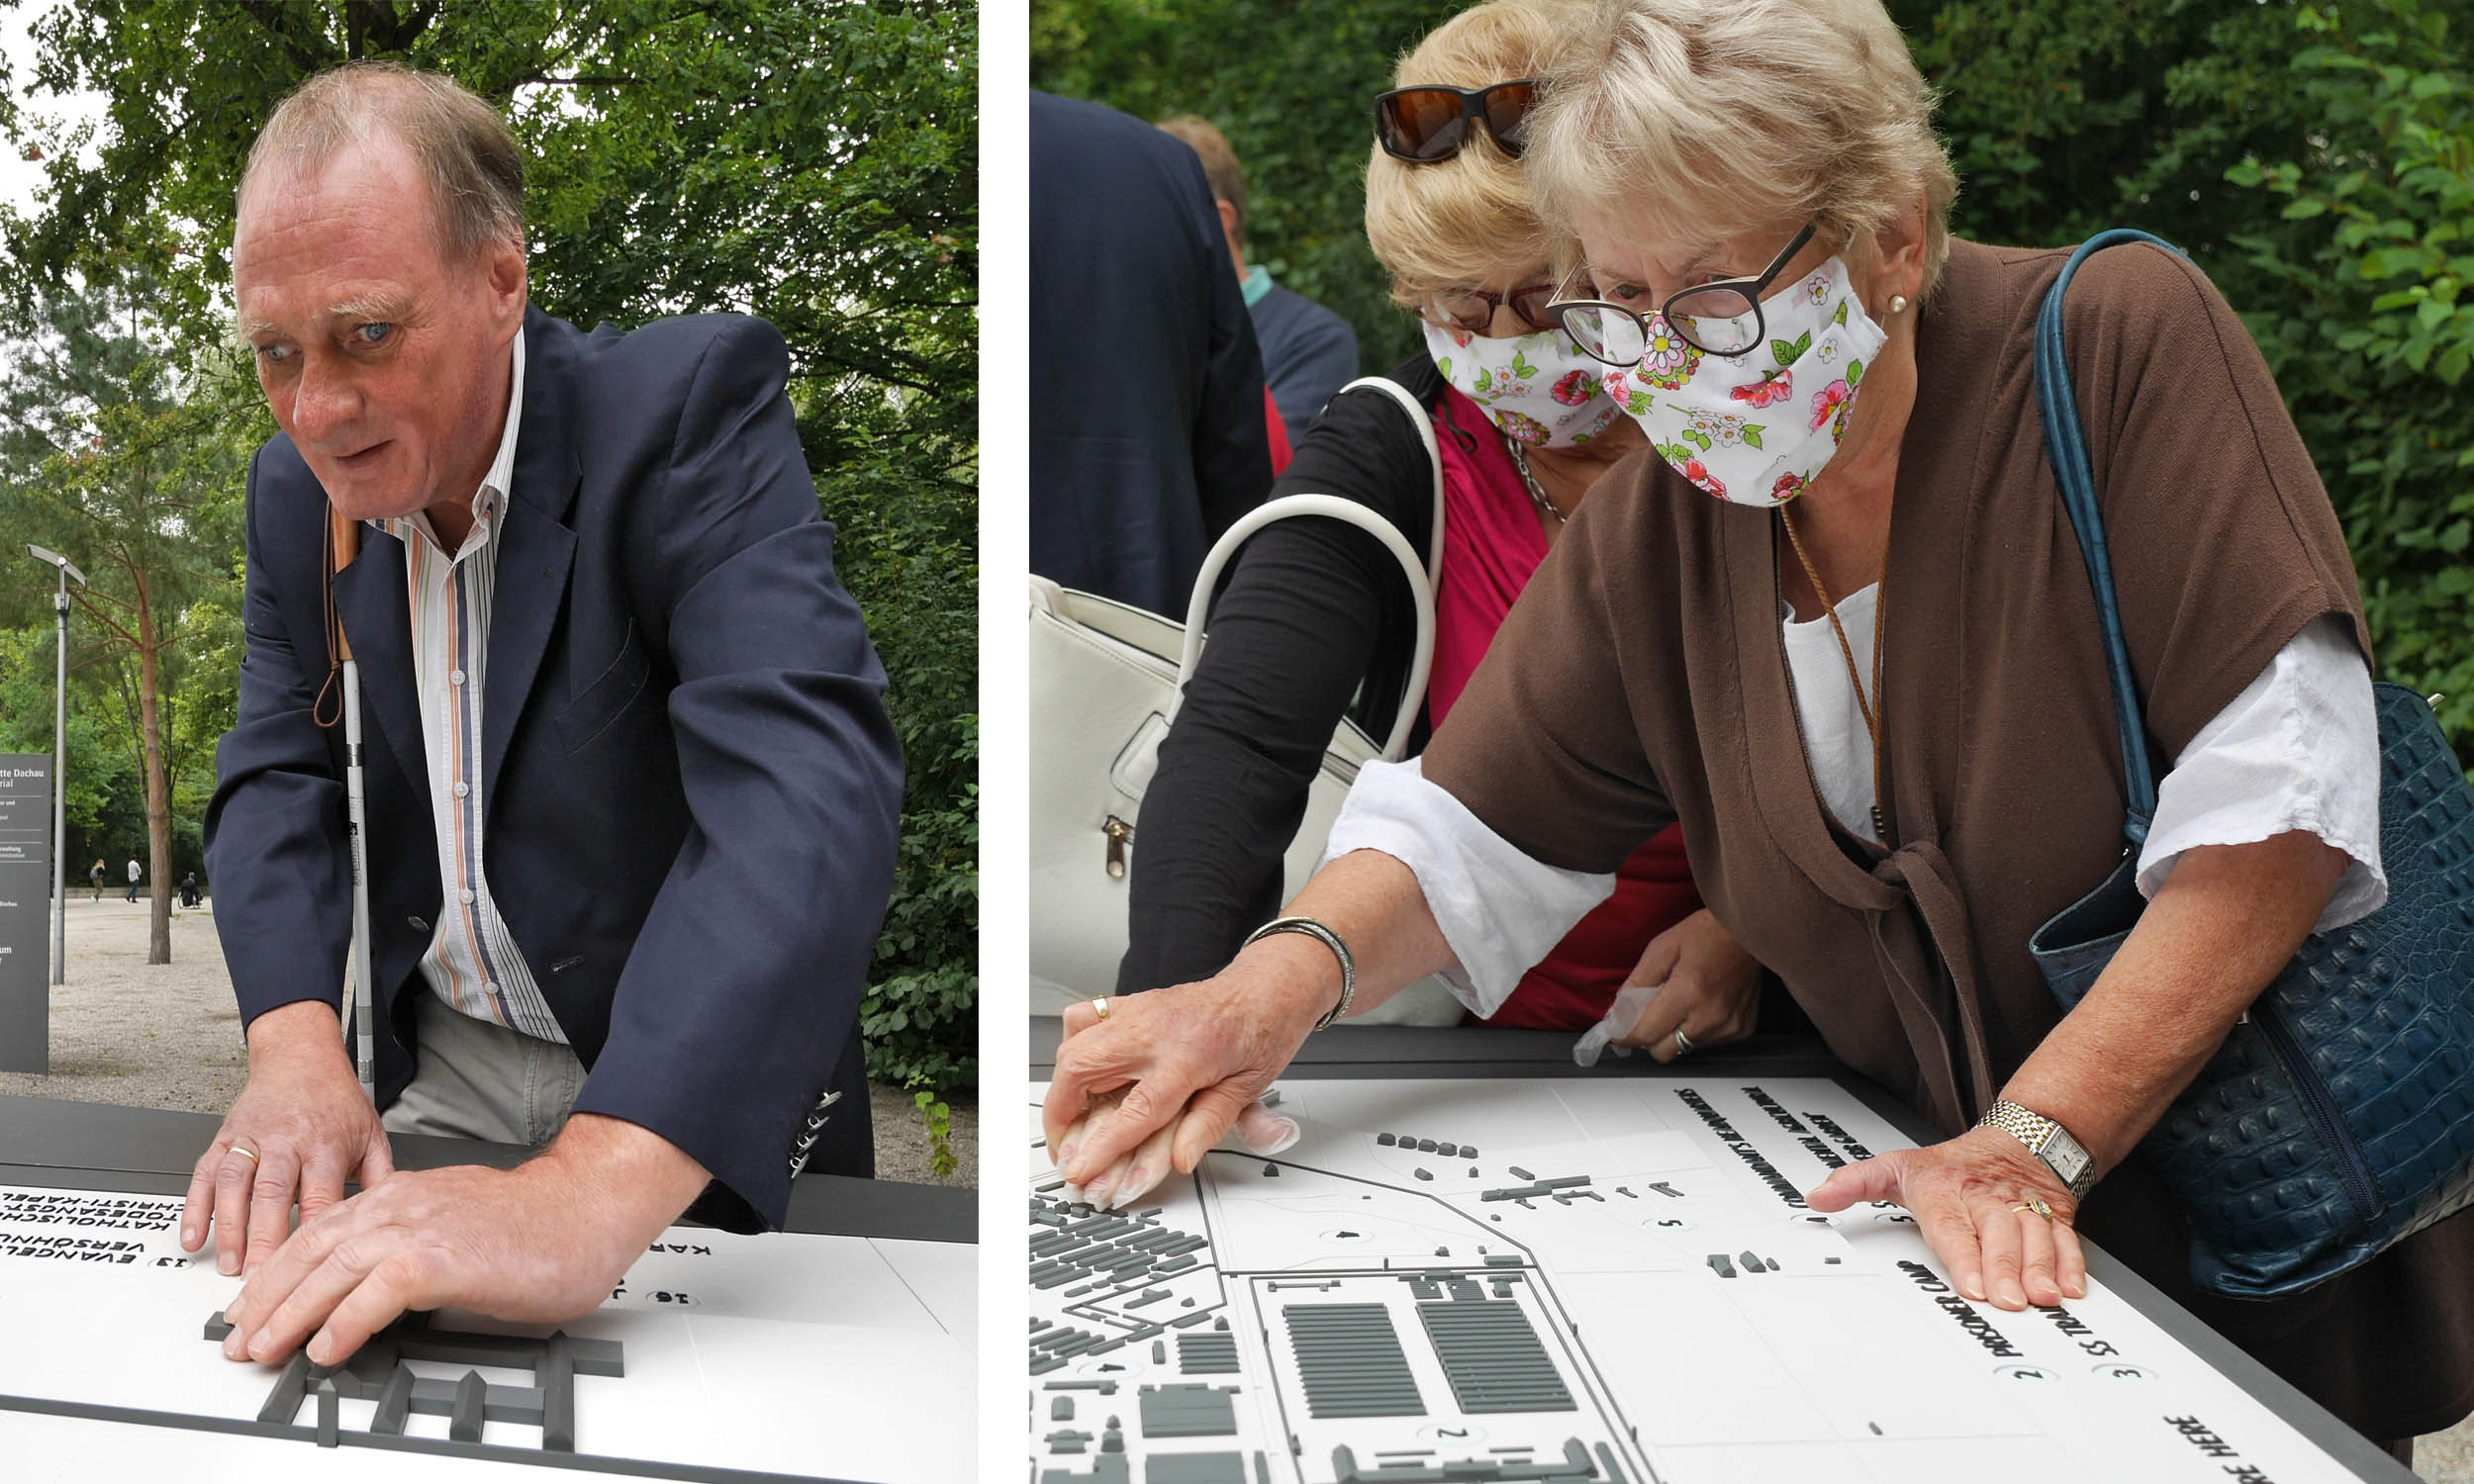 Two photos of members of the Bavarian Federation for the Blind and Visually Impaired